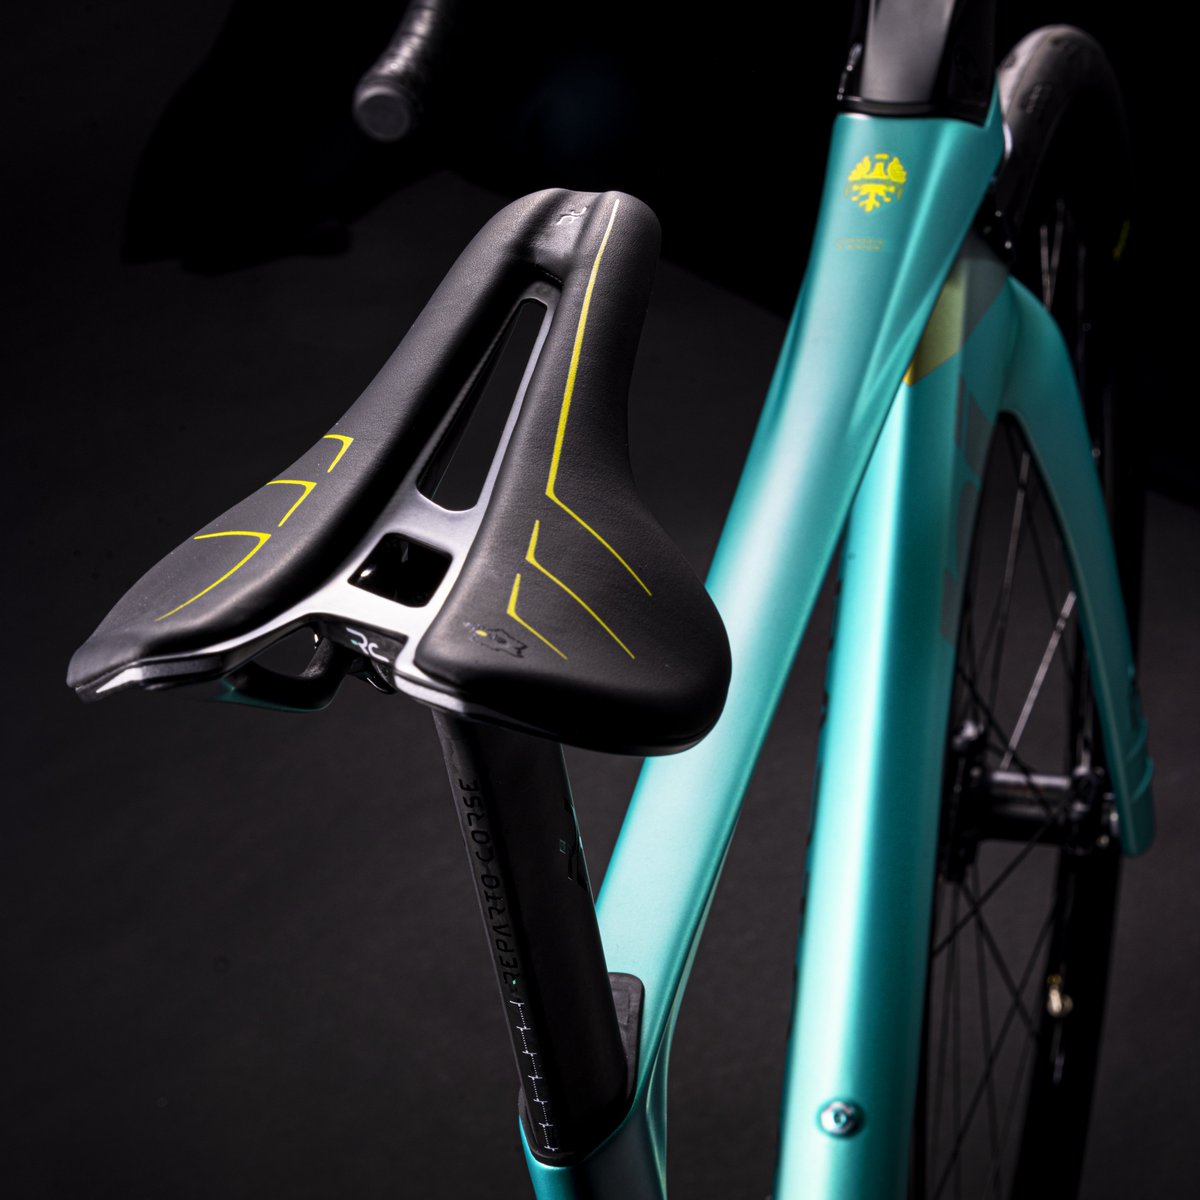 The Oltre RC Tour de France boasts Bianchi Reparto Corse-developed components, with combined signature pigments of Bianchi and Le Tour, hand-painted in Italy by our artisans.
6PM IT Time. 👉 bit.ly/3N05etf 

#Bianchi #LeTourOfficialBianchi #TDF2023 #OltreRC @LeTour